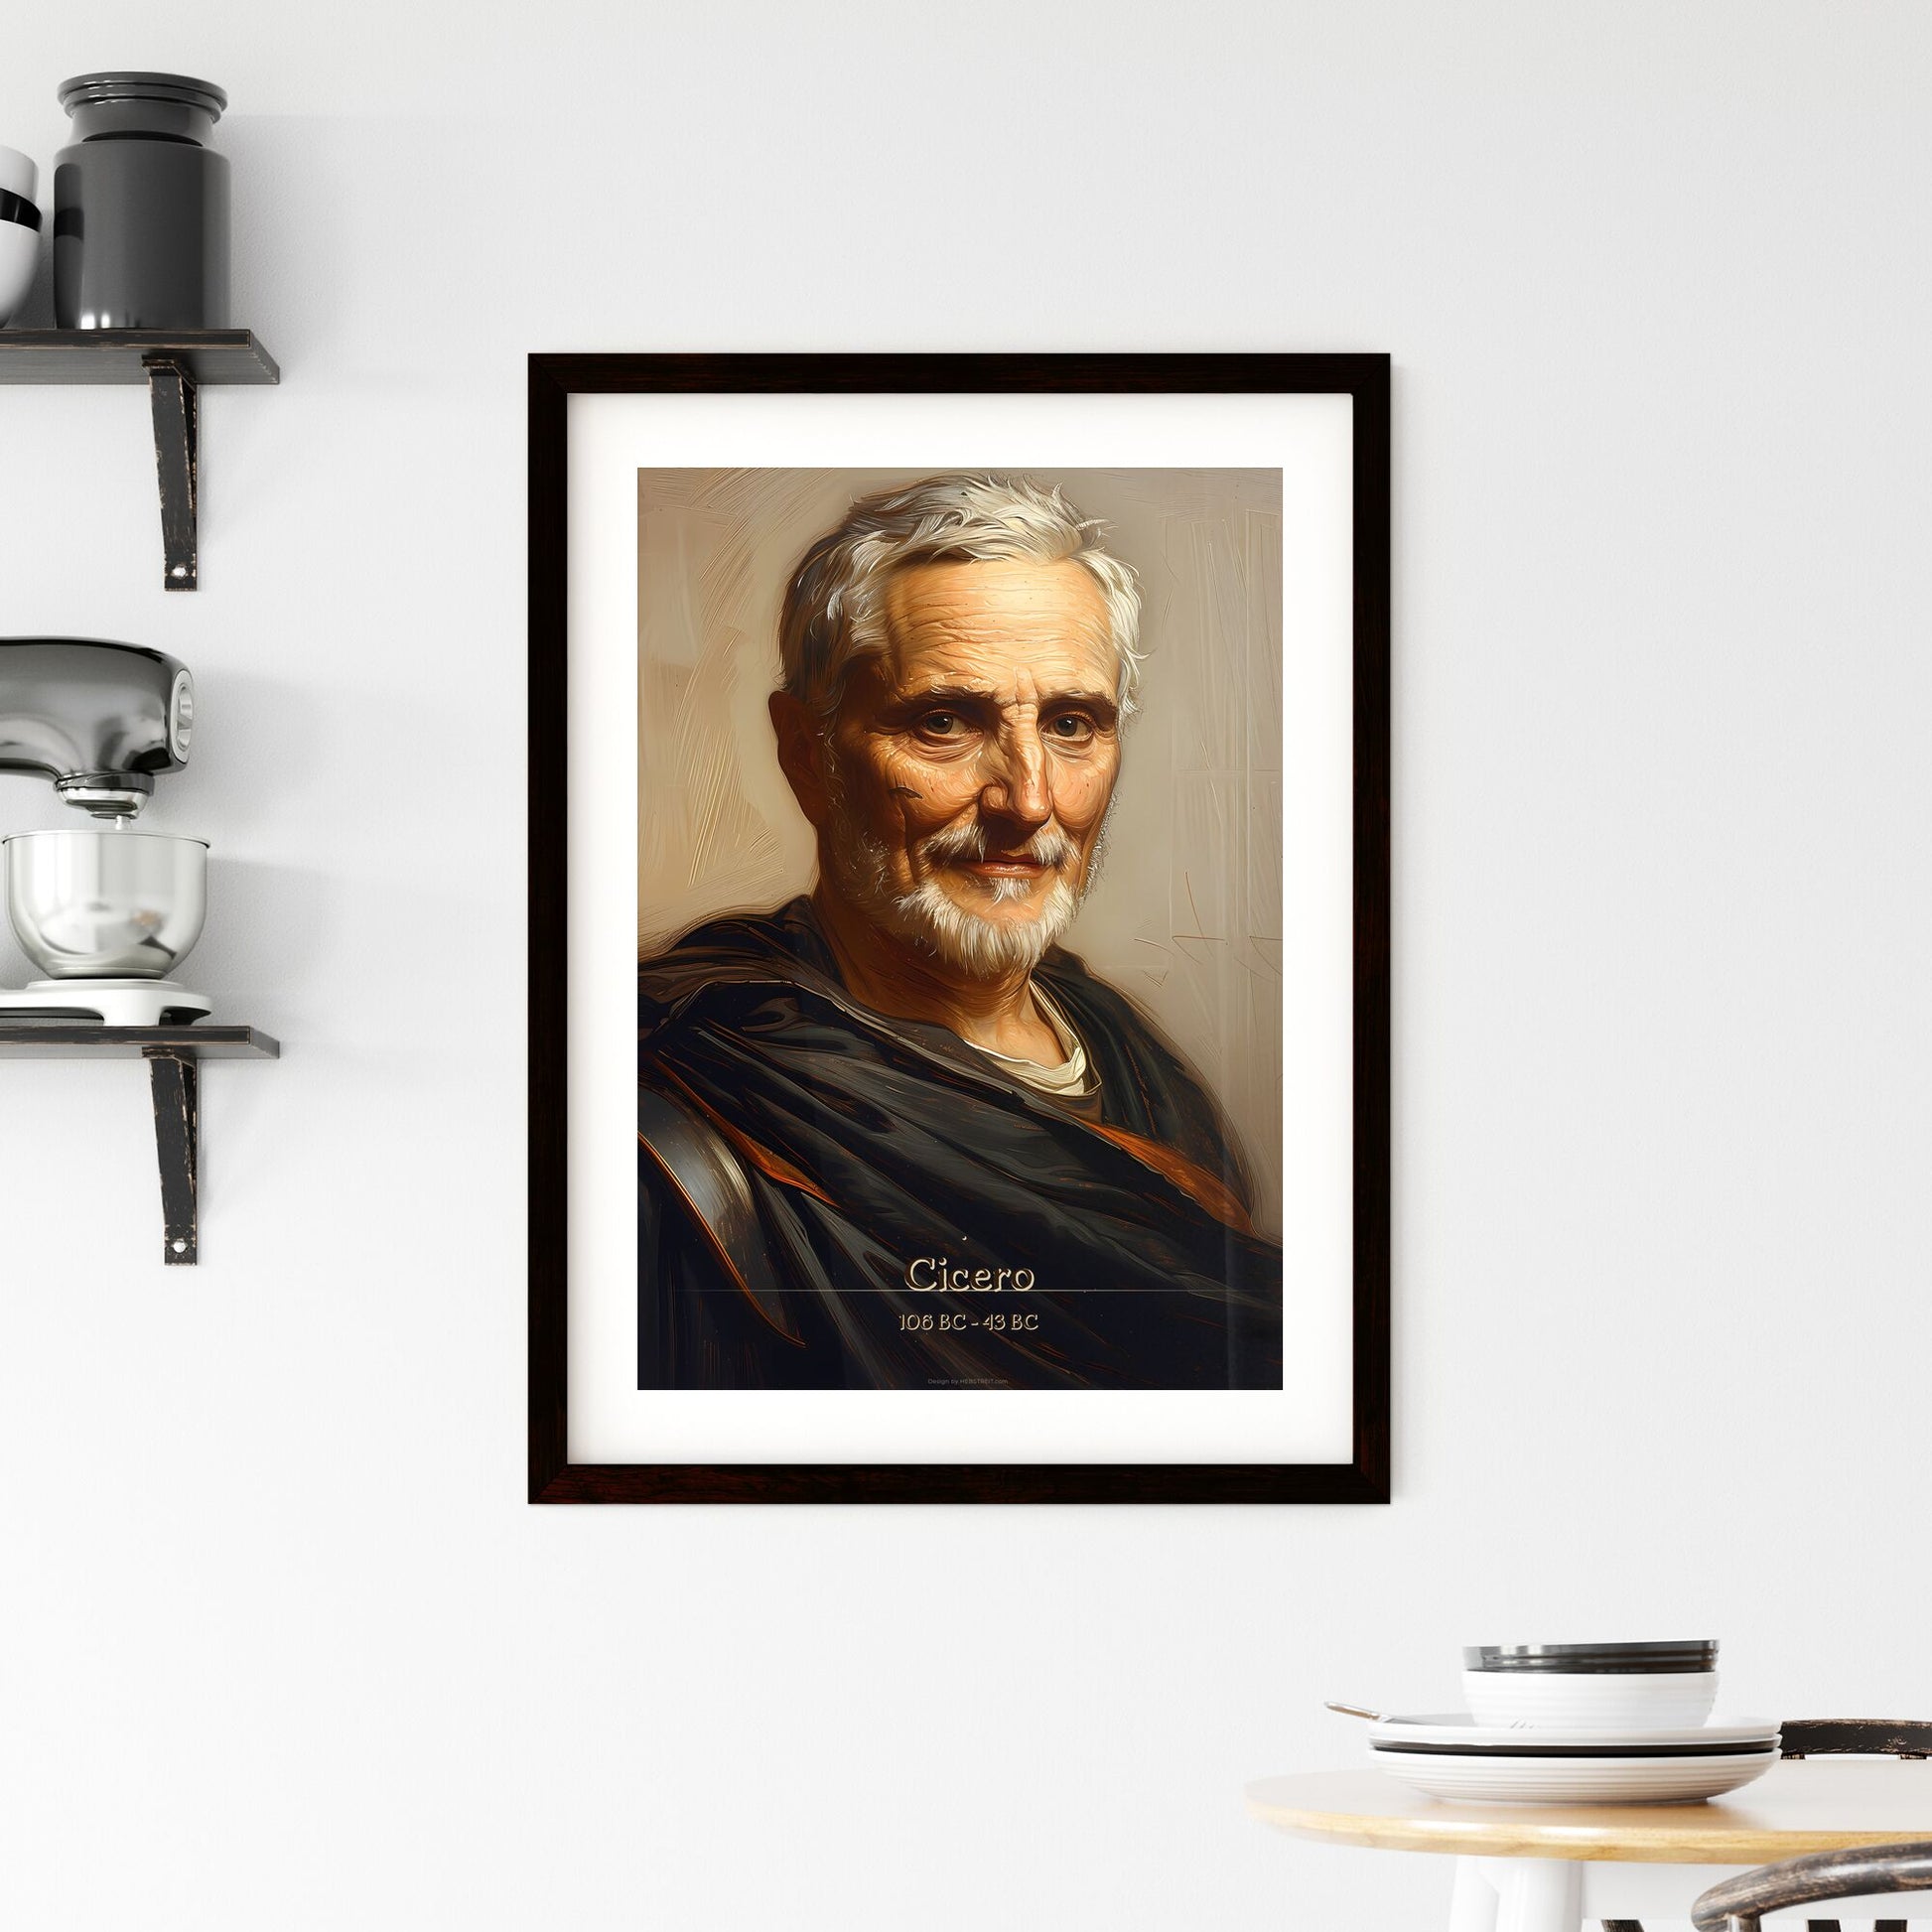 Cicero, 106 BC - 43 BC, A Poster of a man with white hair and beard Default Title